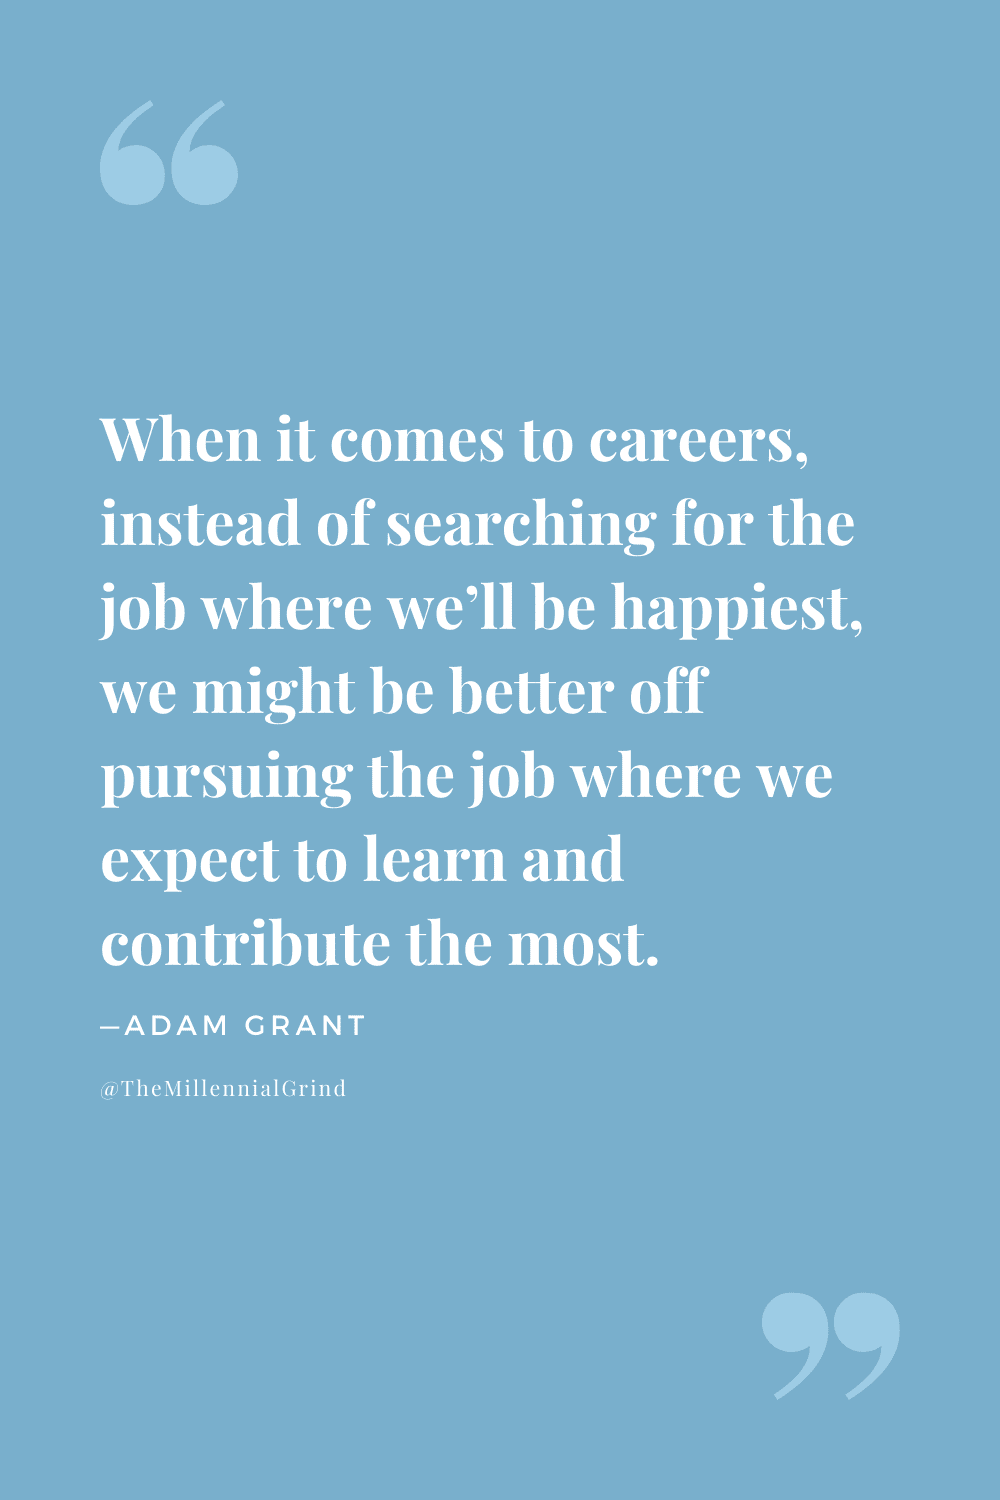 Quotes From Think Again by Adam Grant